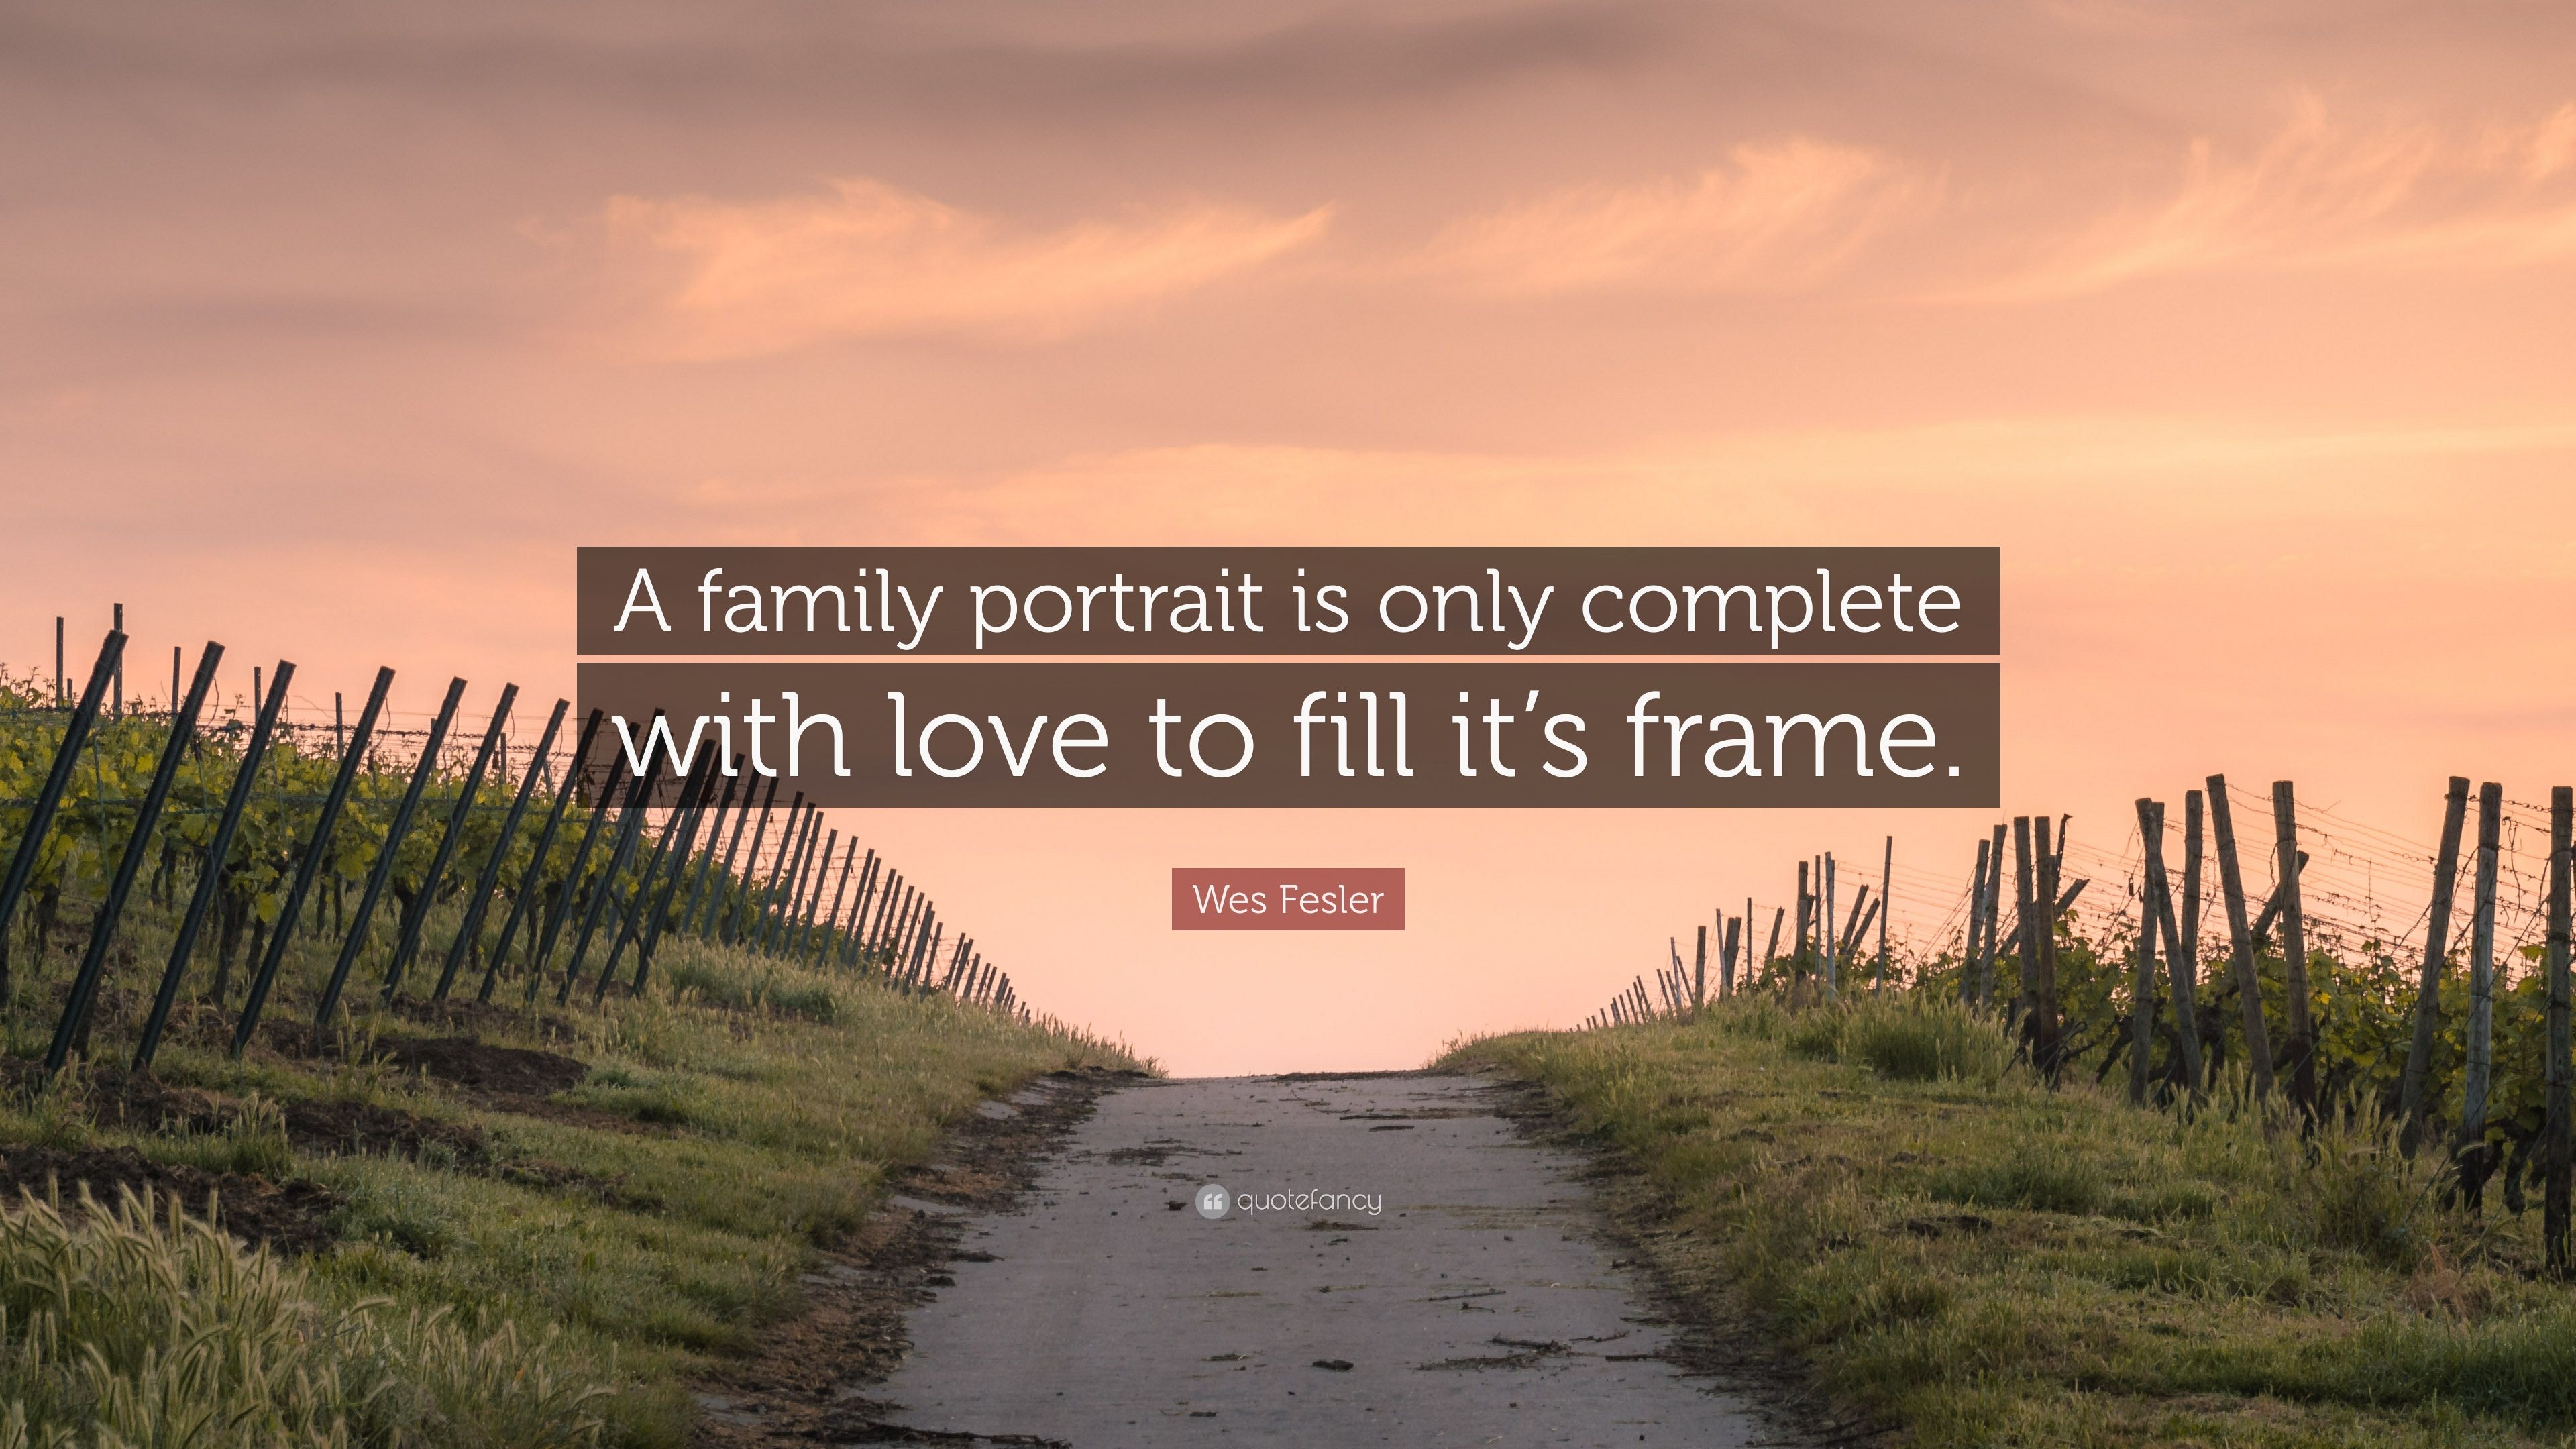 Wes Fesler Quote: “A family portrait is only complete with love to